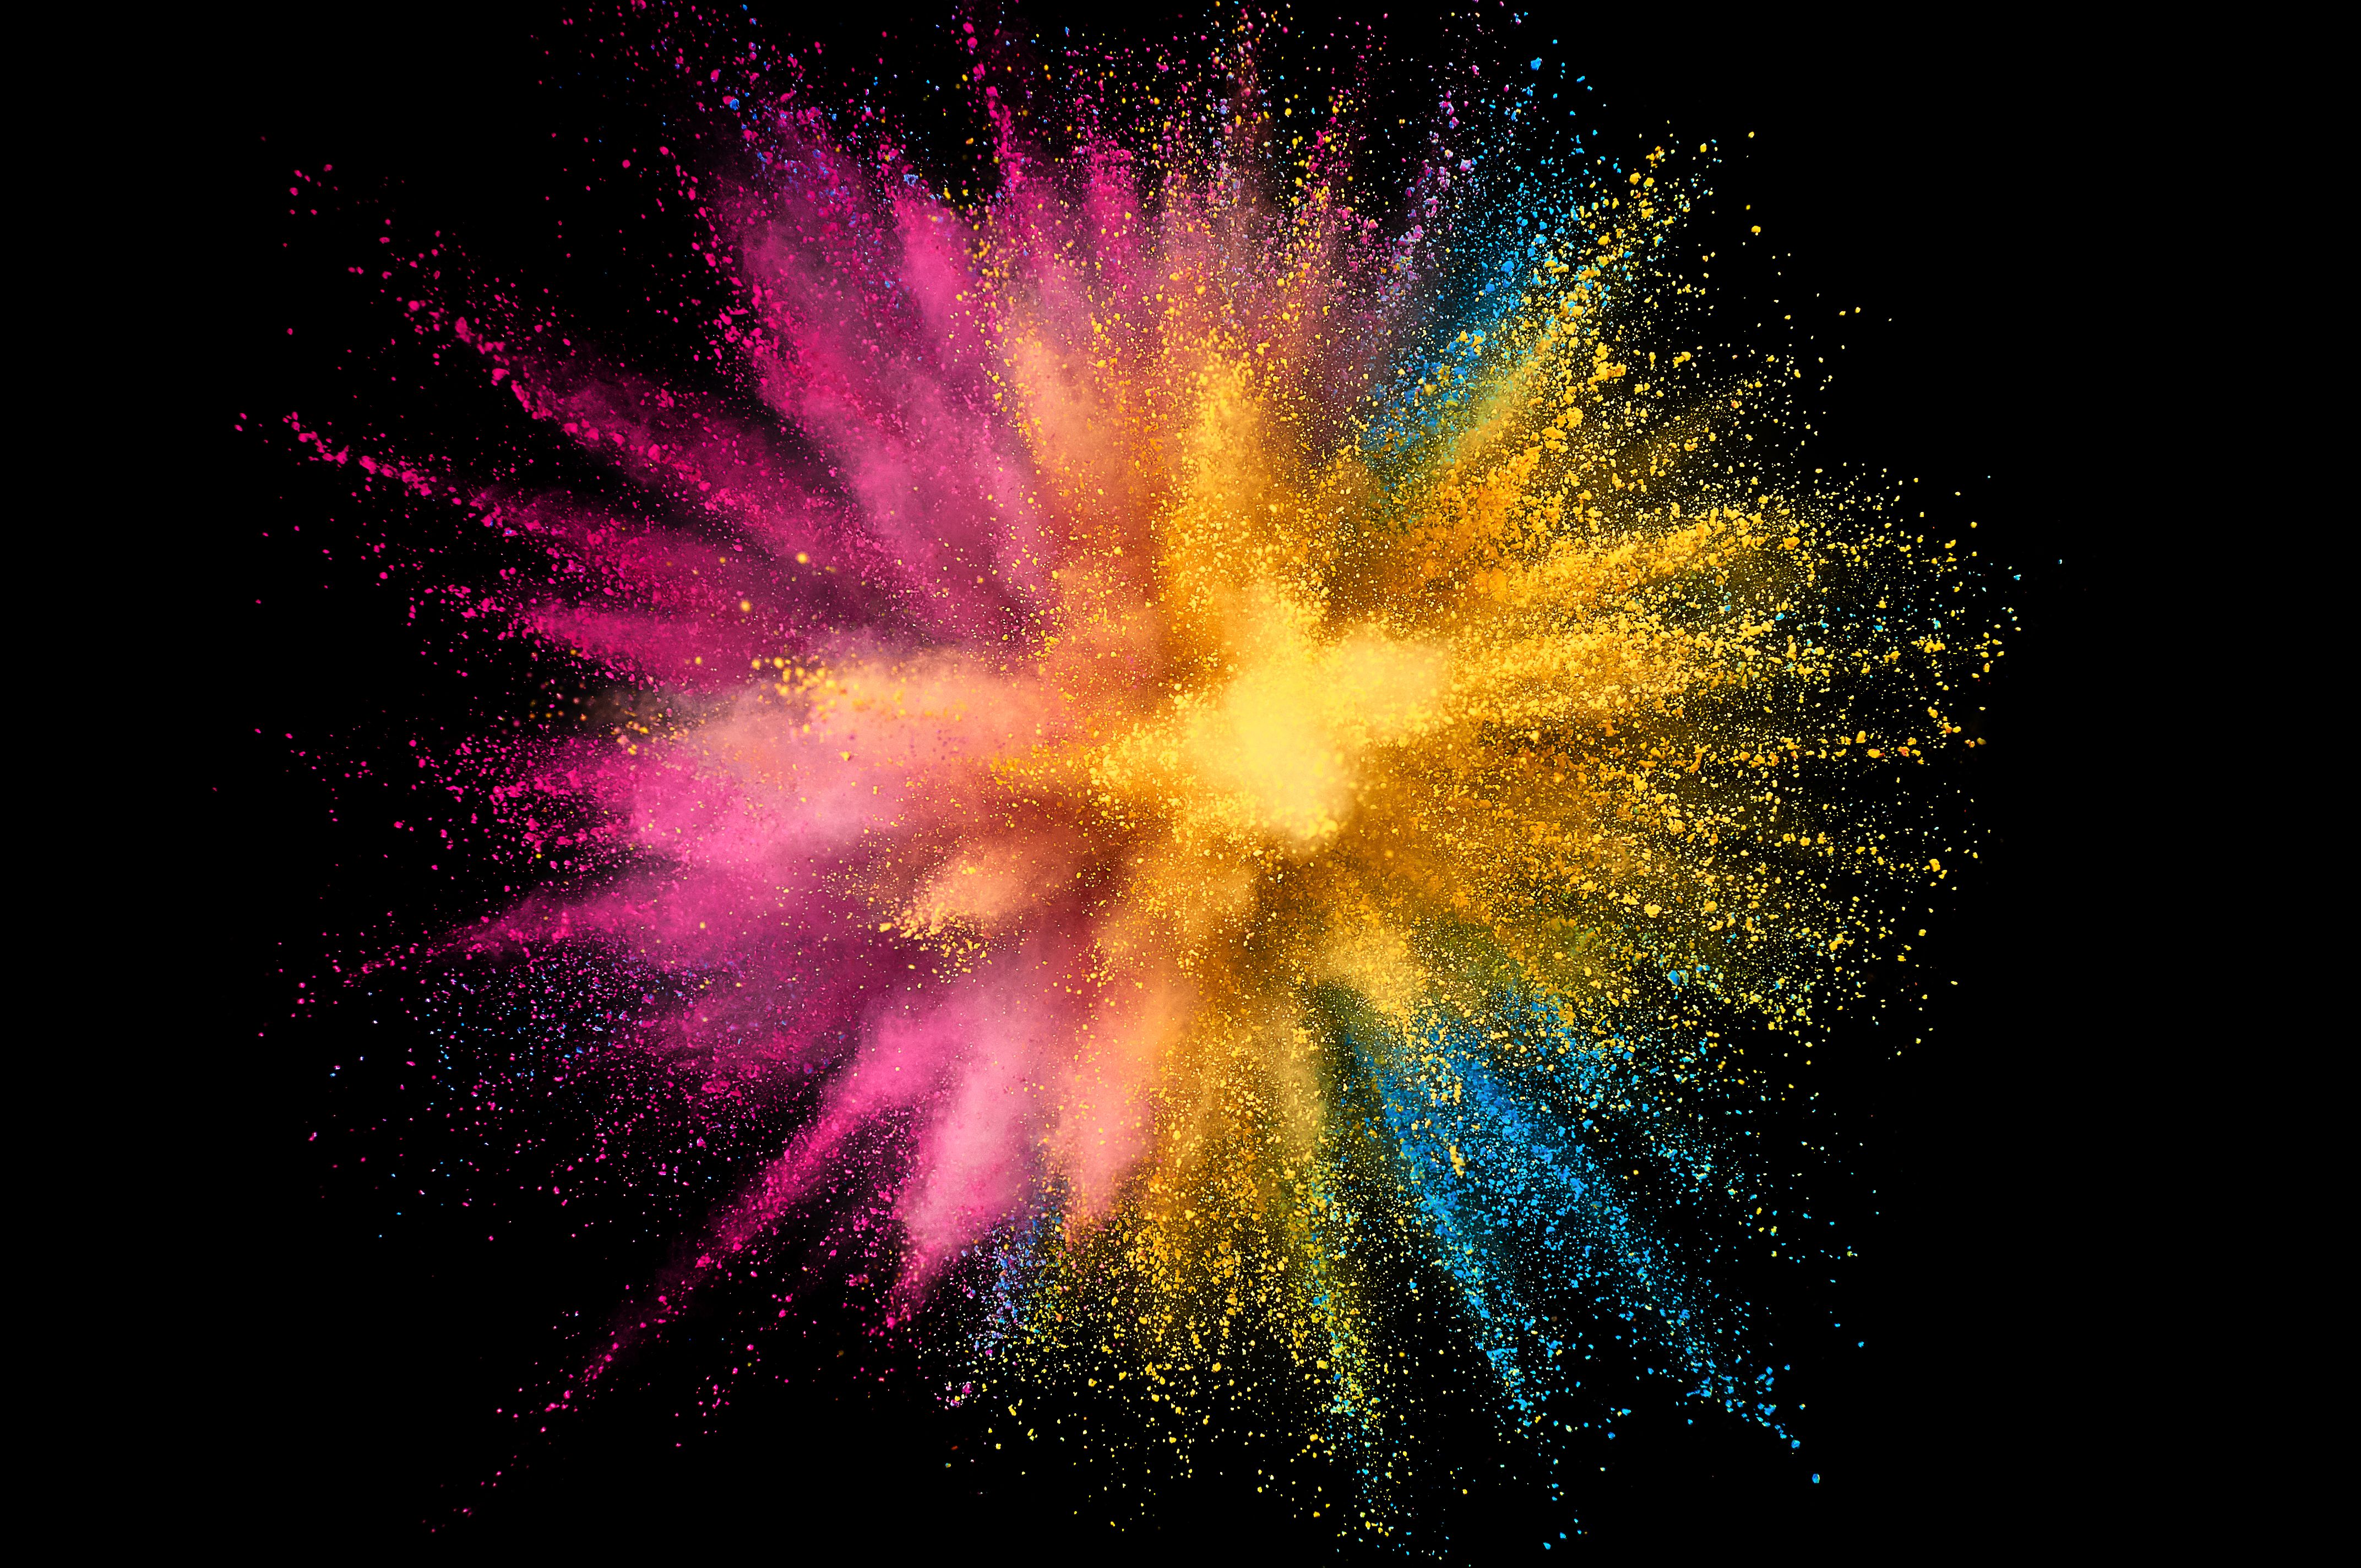 Pink, orange, yellow, purple, and blue powder explosion to represent our powder coating services